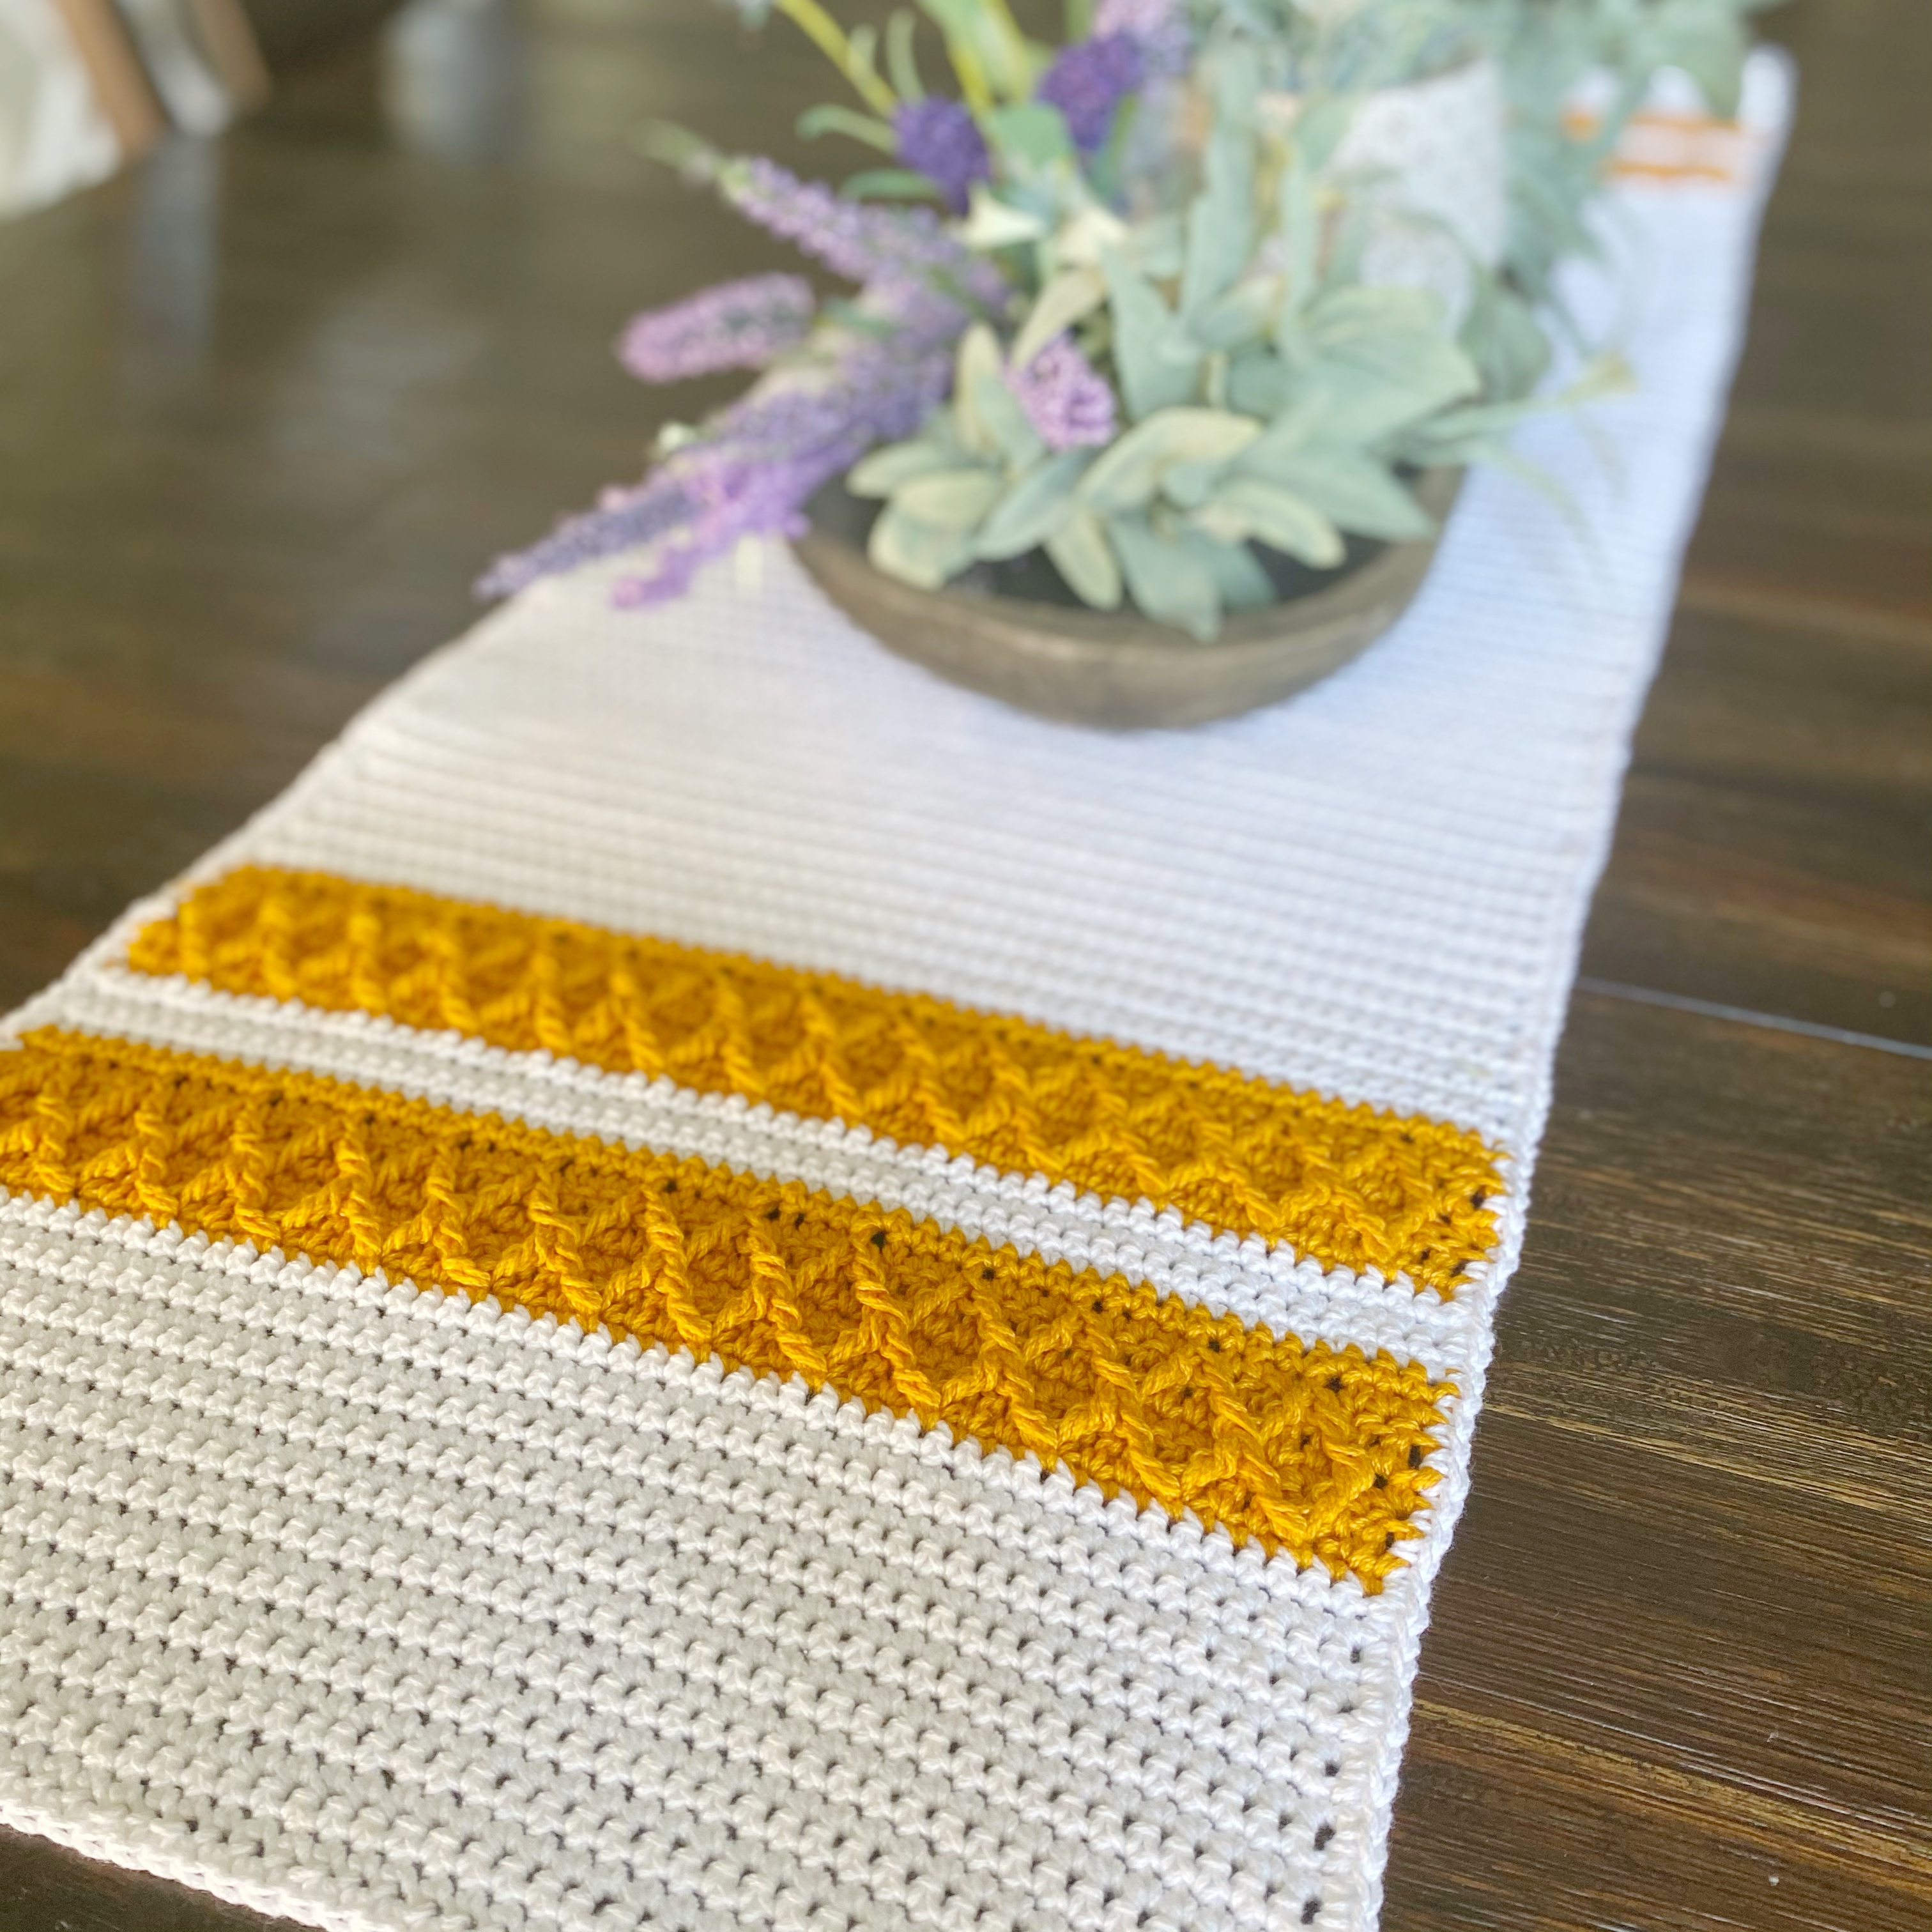 How To Make A Spring Crochet Table Runner A Plush Pineapple